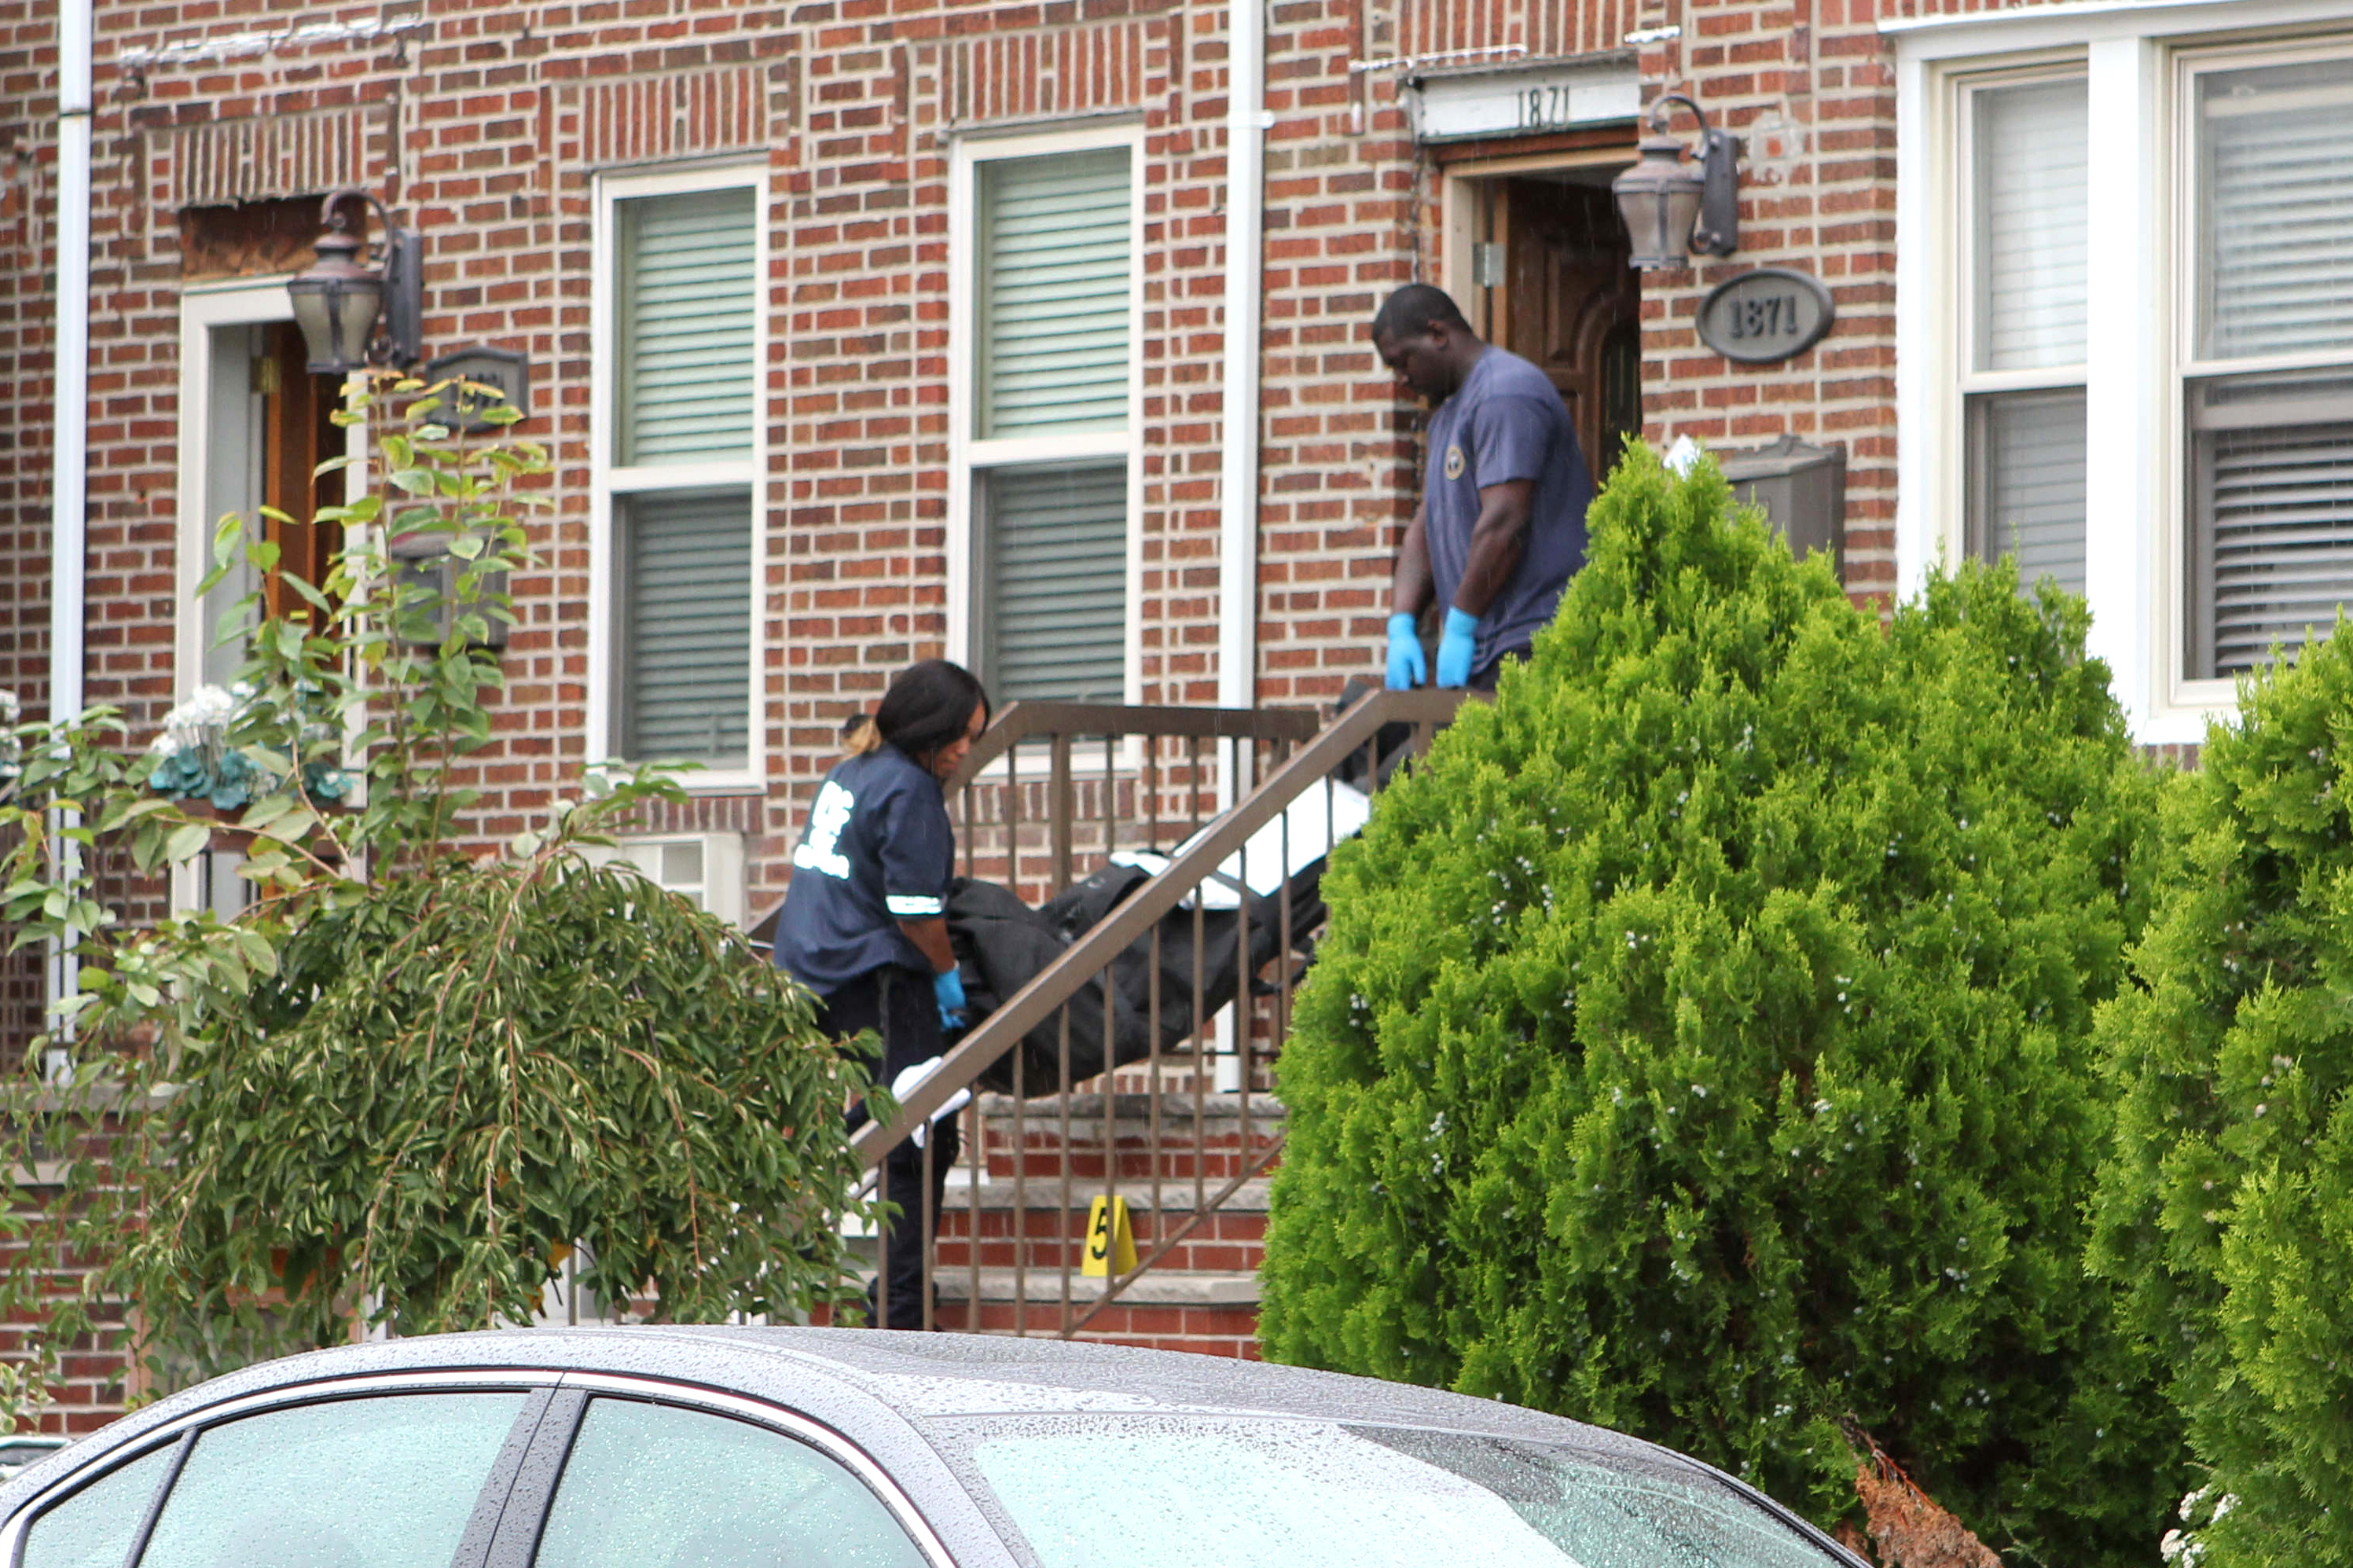 Officials remove the body of a 44-year-old man from the scene in Brooklyn.